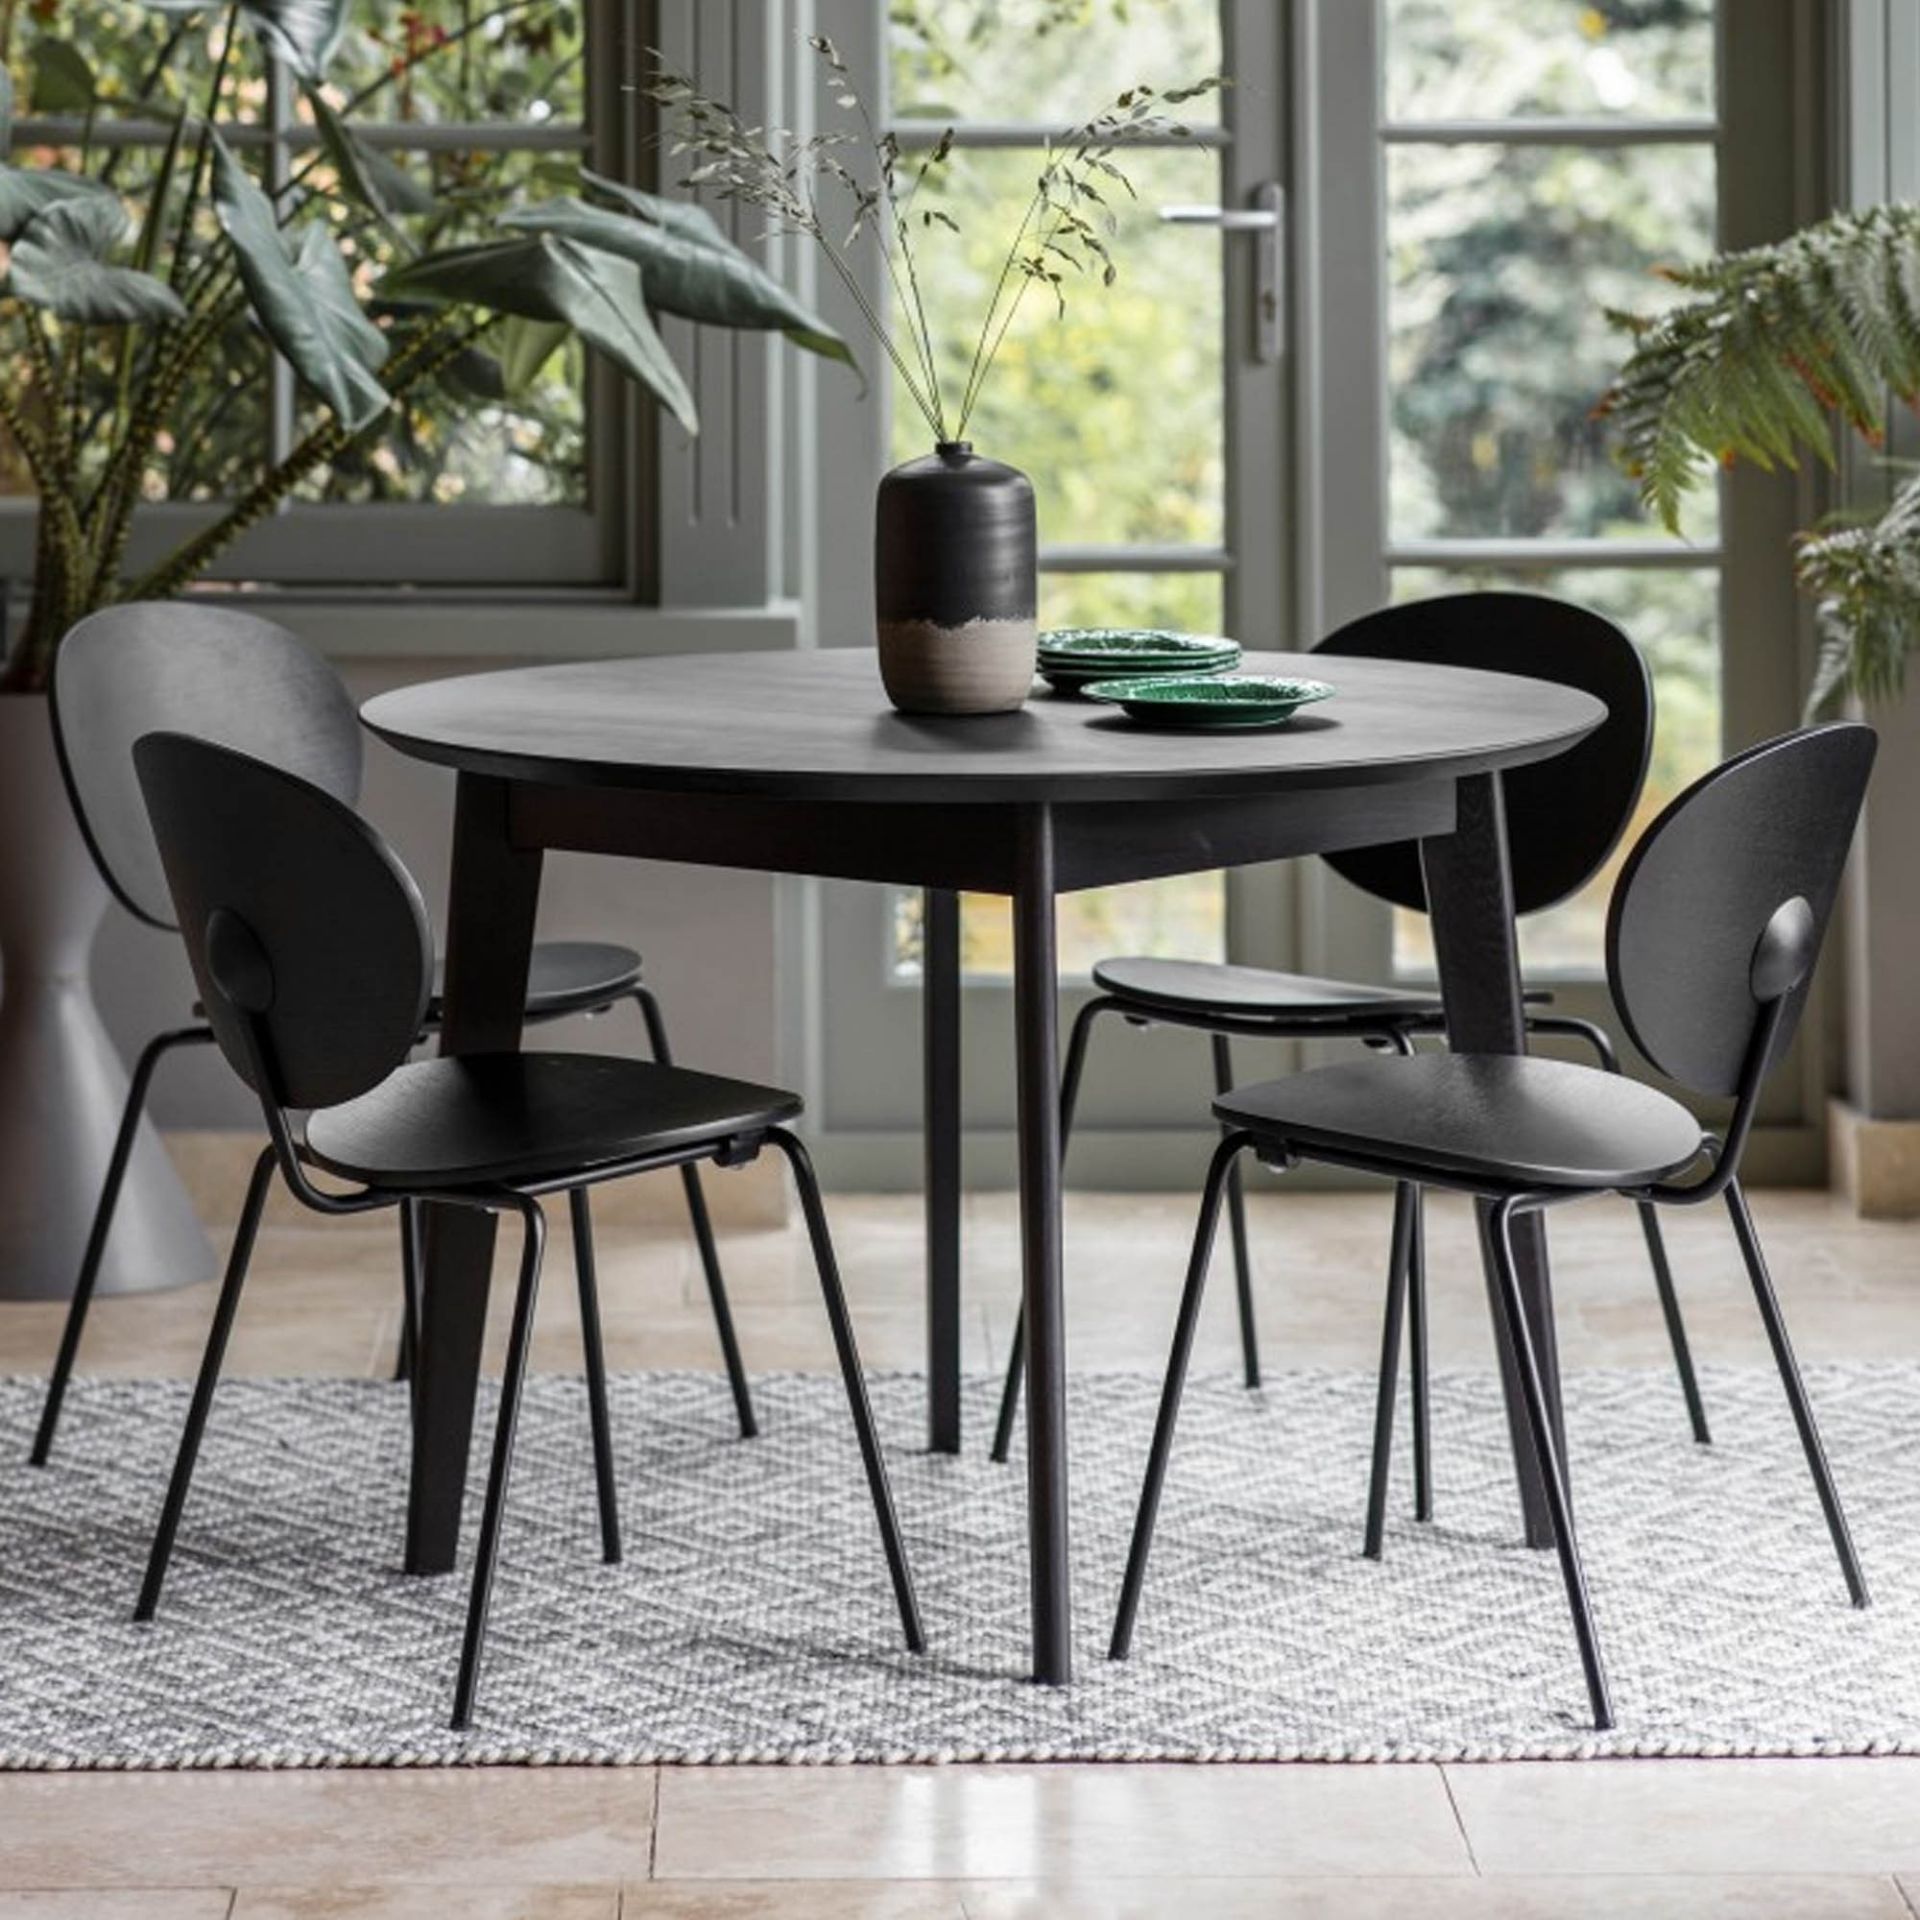 Wycombe Dining Table Round Black 1100 x 1100 The Wycombe Has A Contemporary Look Is Subtle In Colour